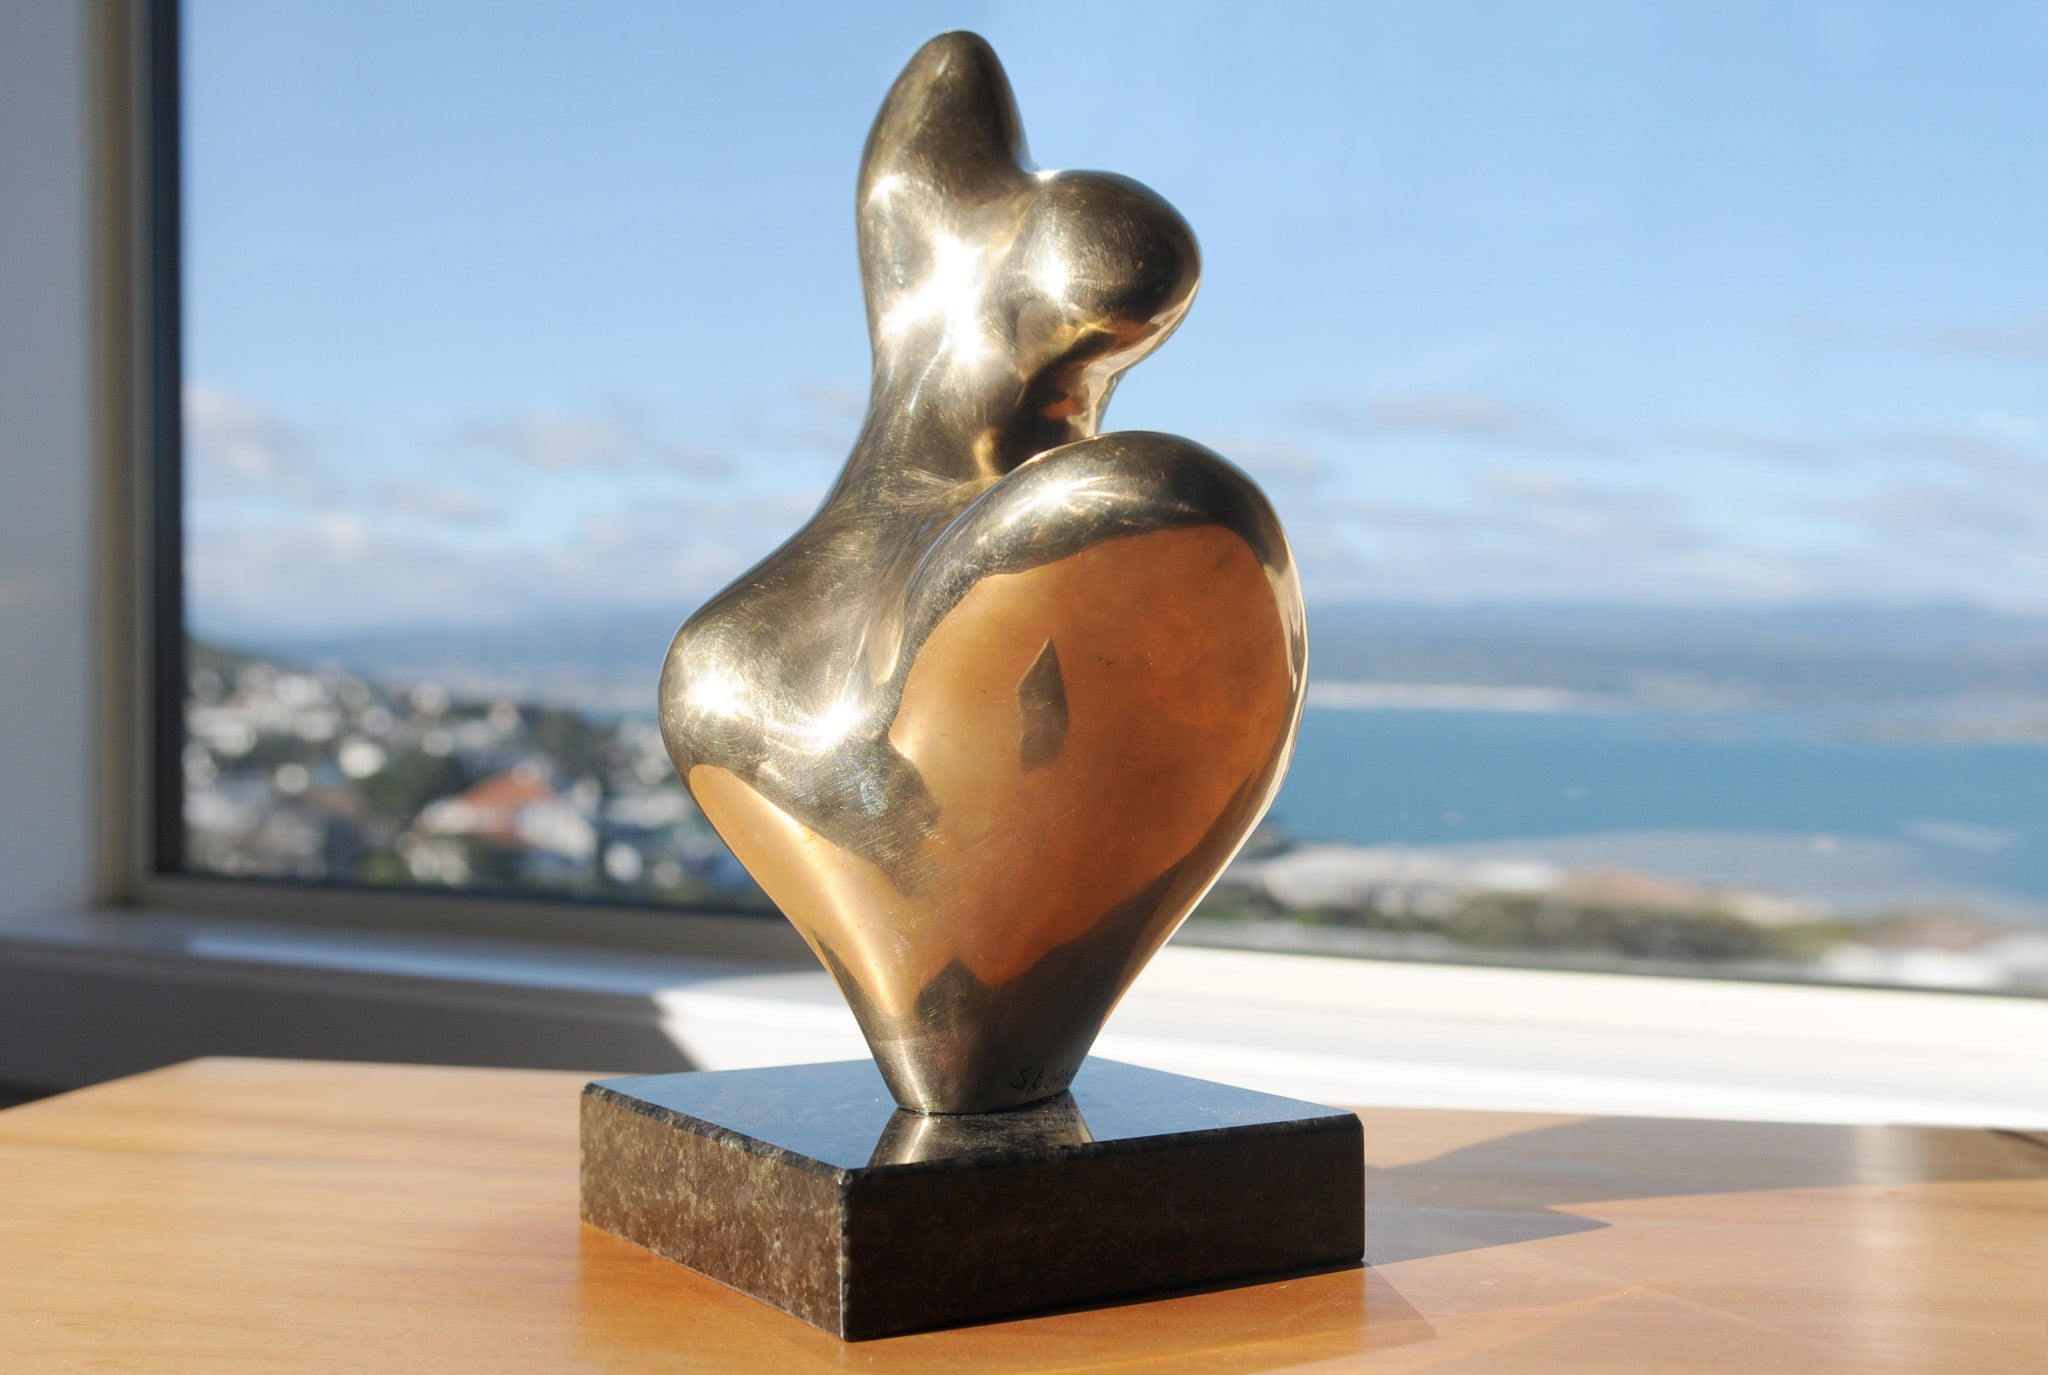 Abstract female figurative bronze sculpture by Stephen Williams